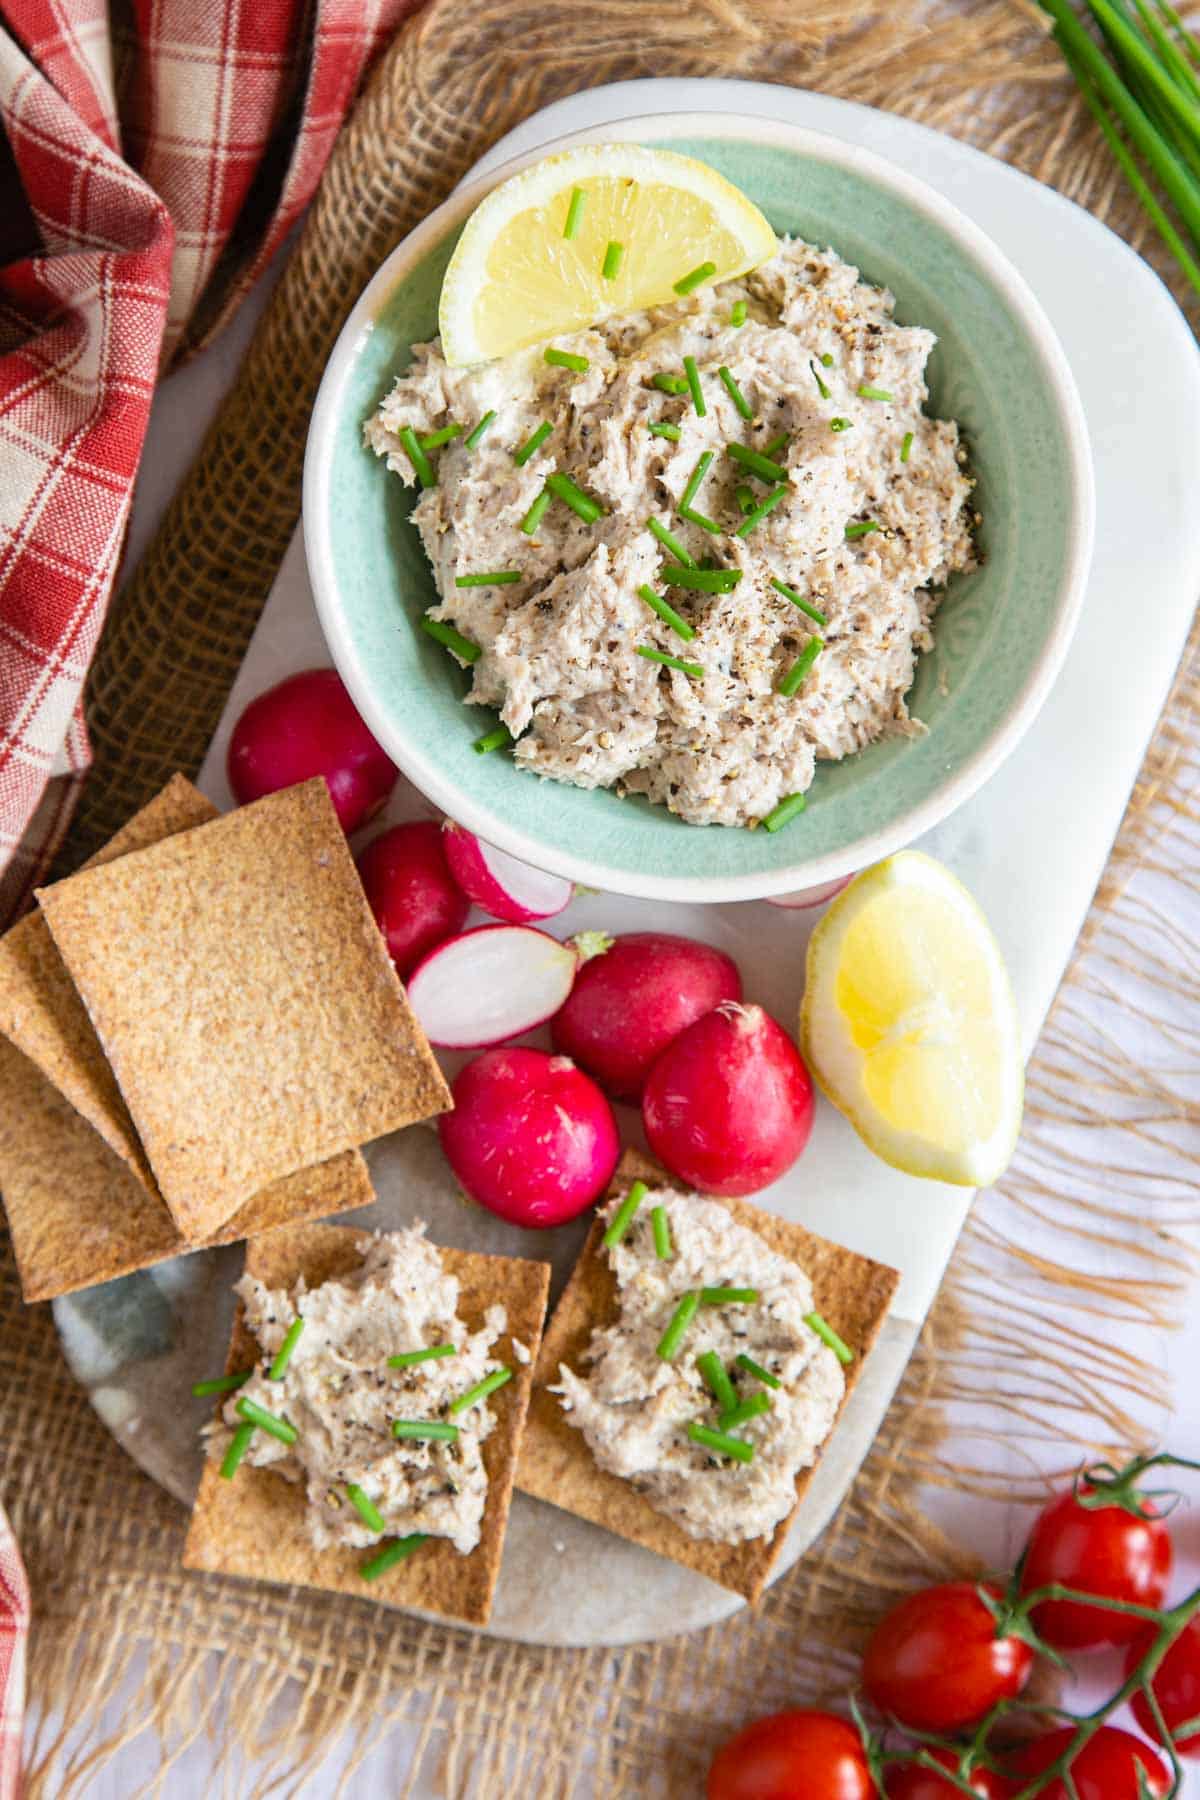 A deliciously light but satisfying lunch - mackerel paté with melba toast and radishes.